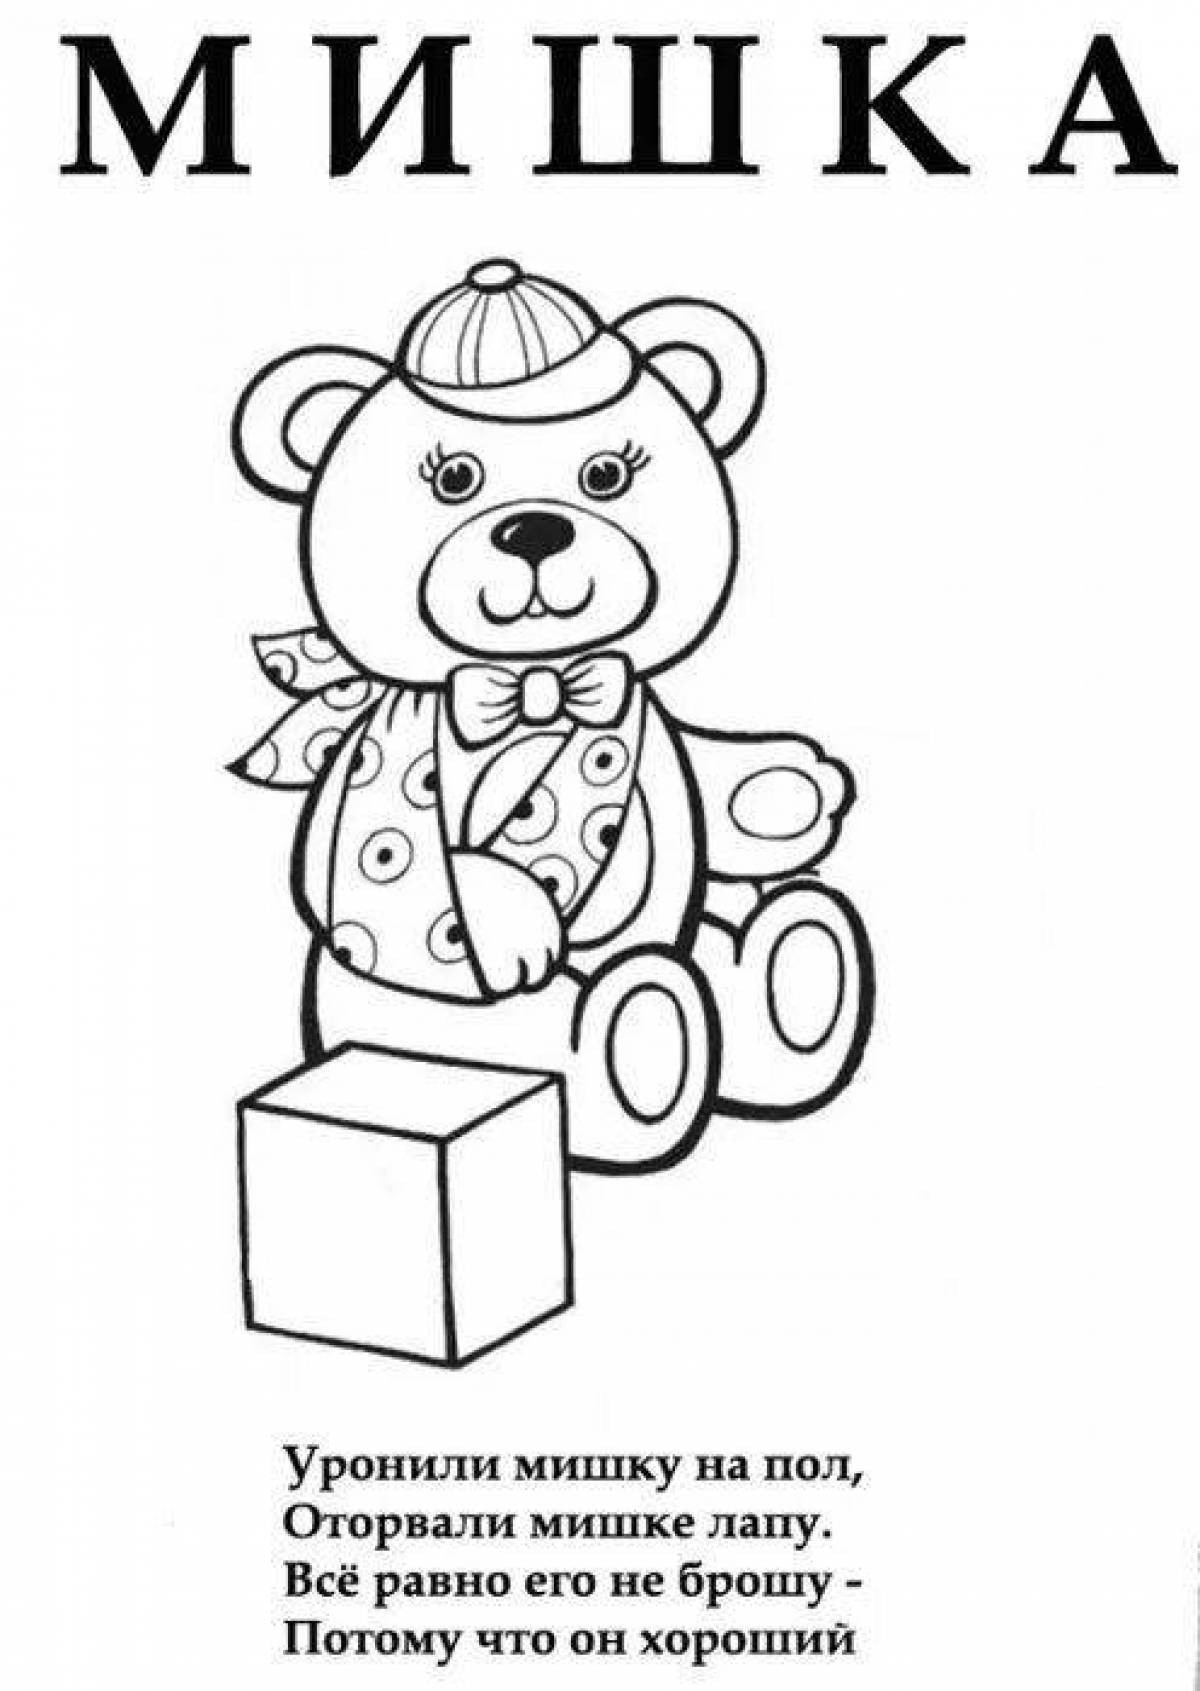 Barto agnia's playful coloring page